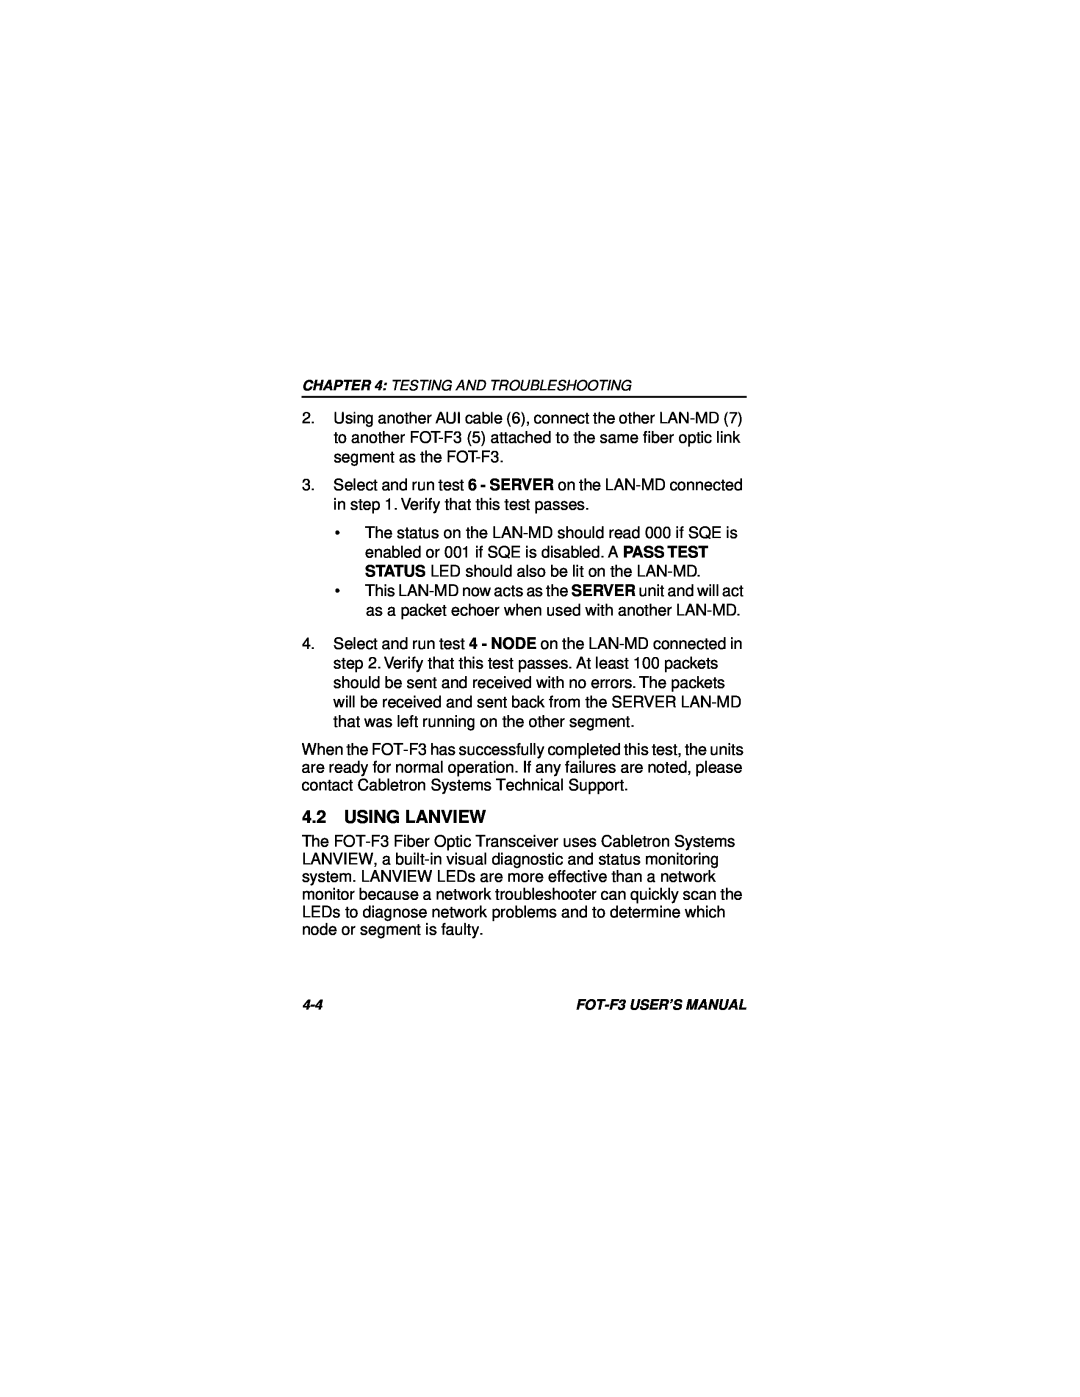 Cabletron Systems F3 user manual Using Lanview 